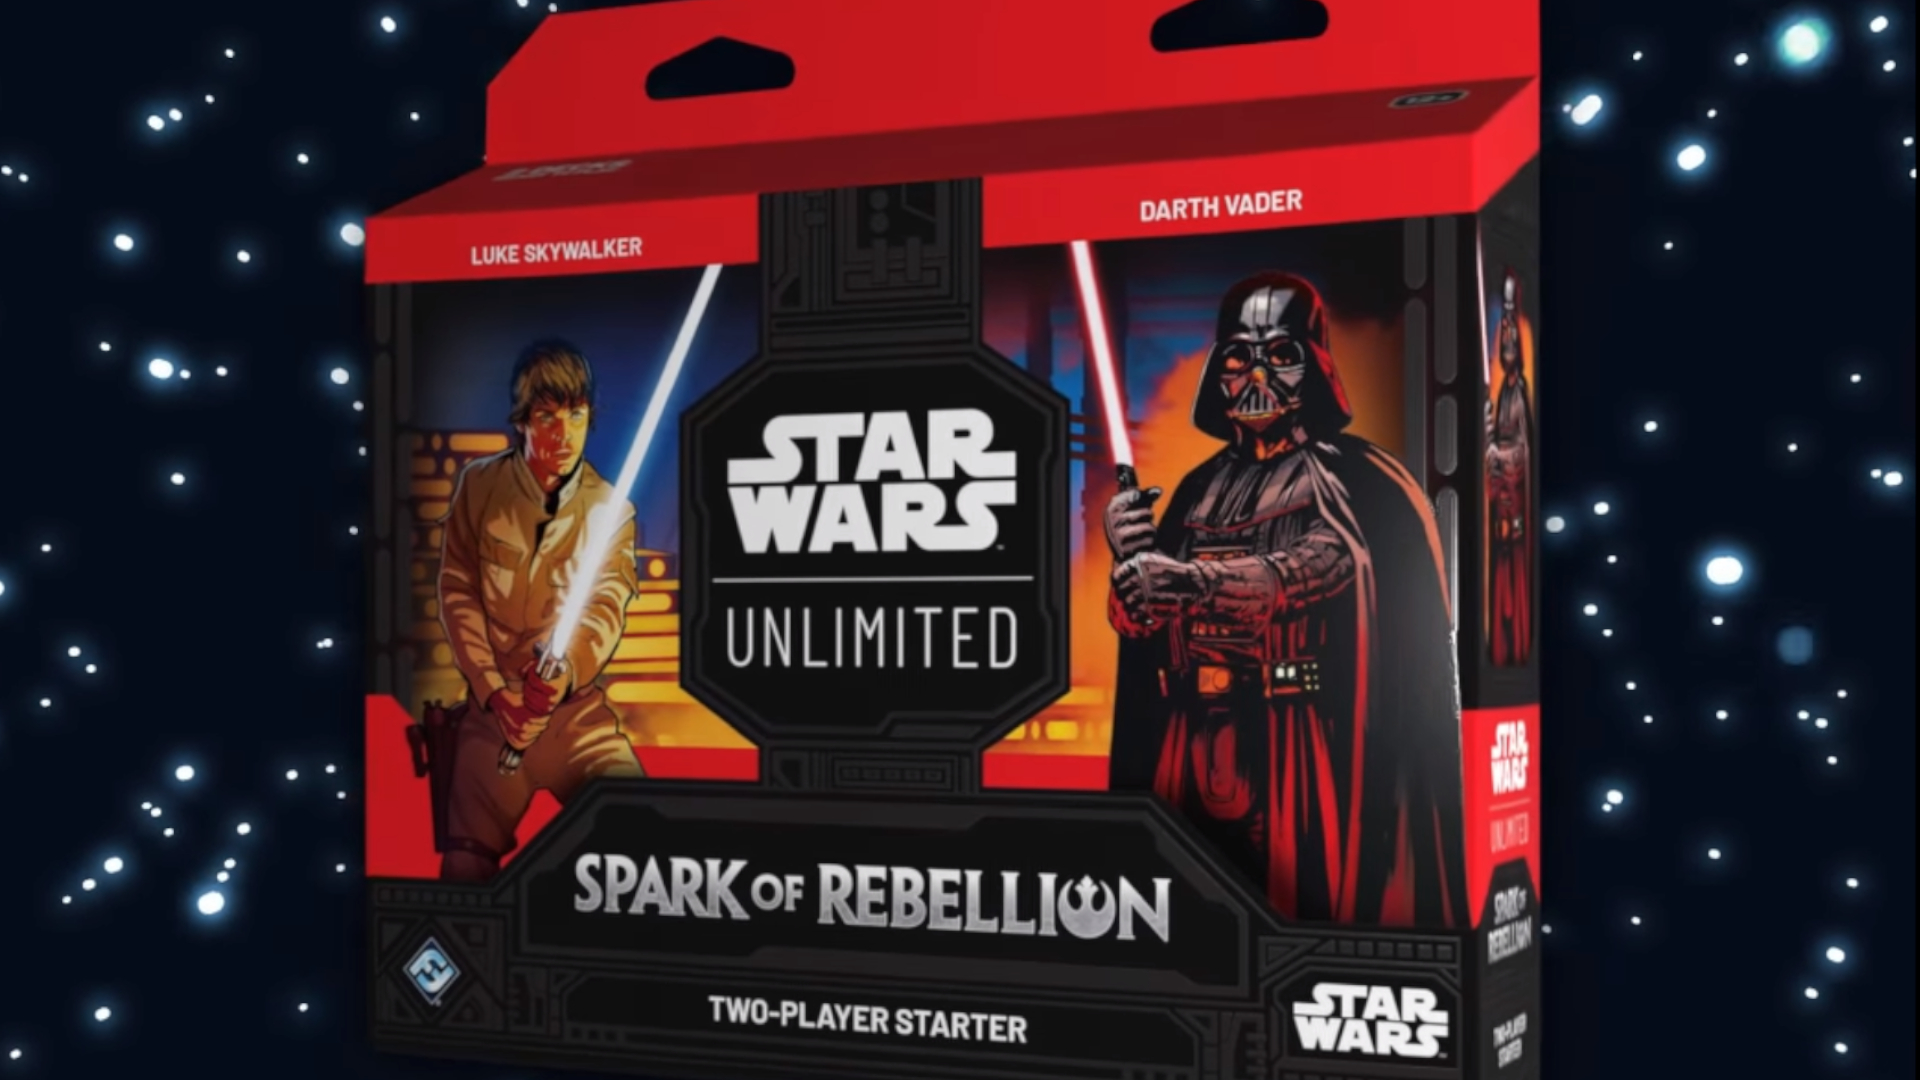 Contents of Star Wars: Unlimited Booster Packs Revealed